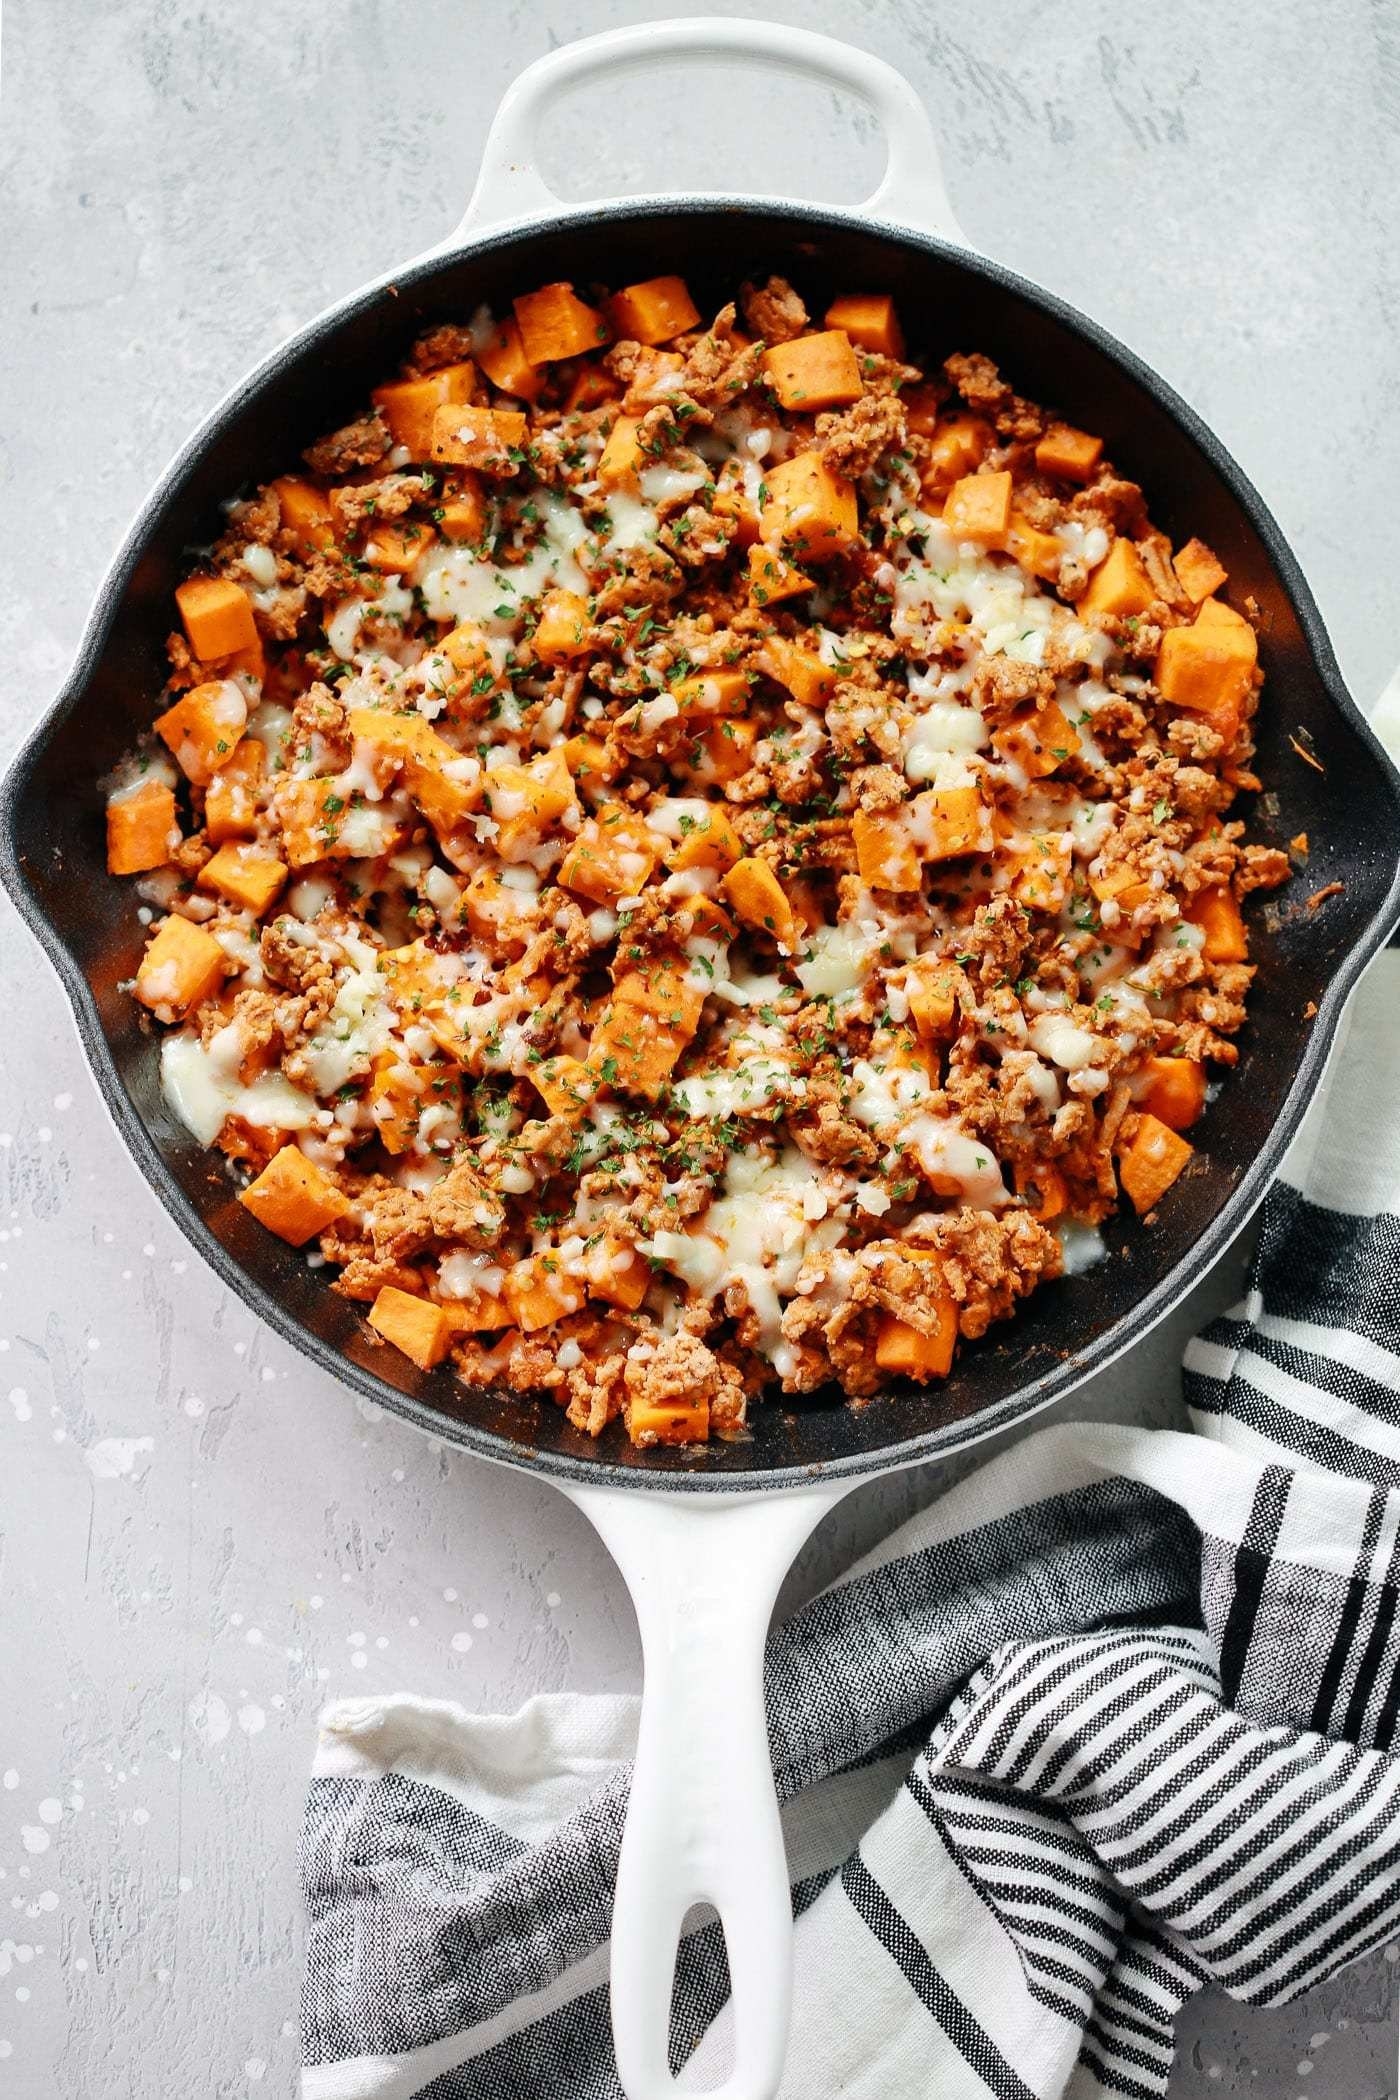 A skillet filled with turkey, sweet potatoes, and cheese.